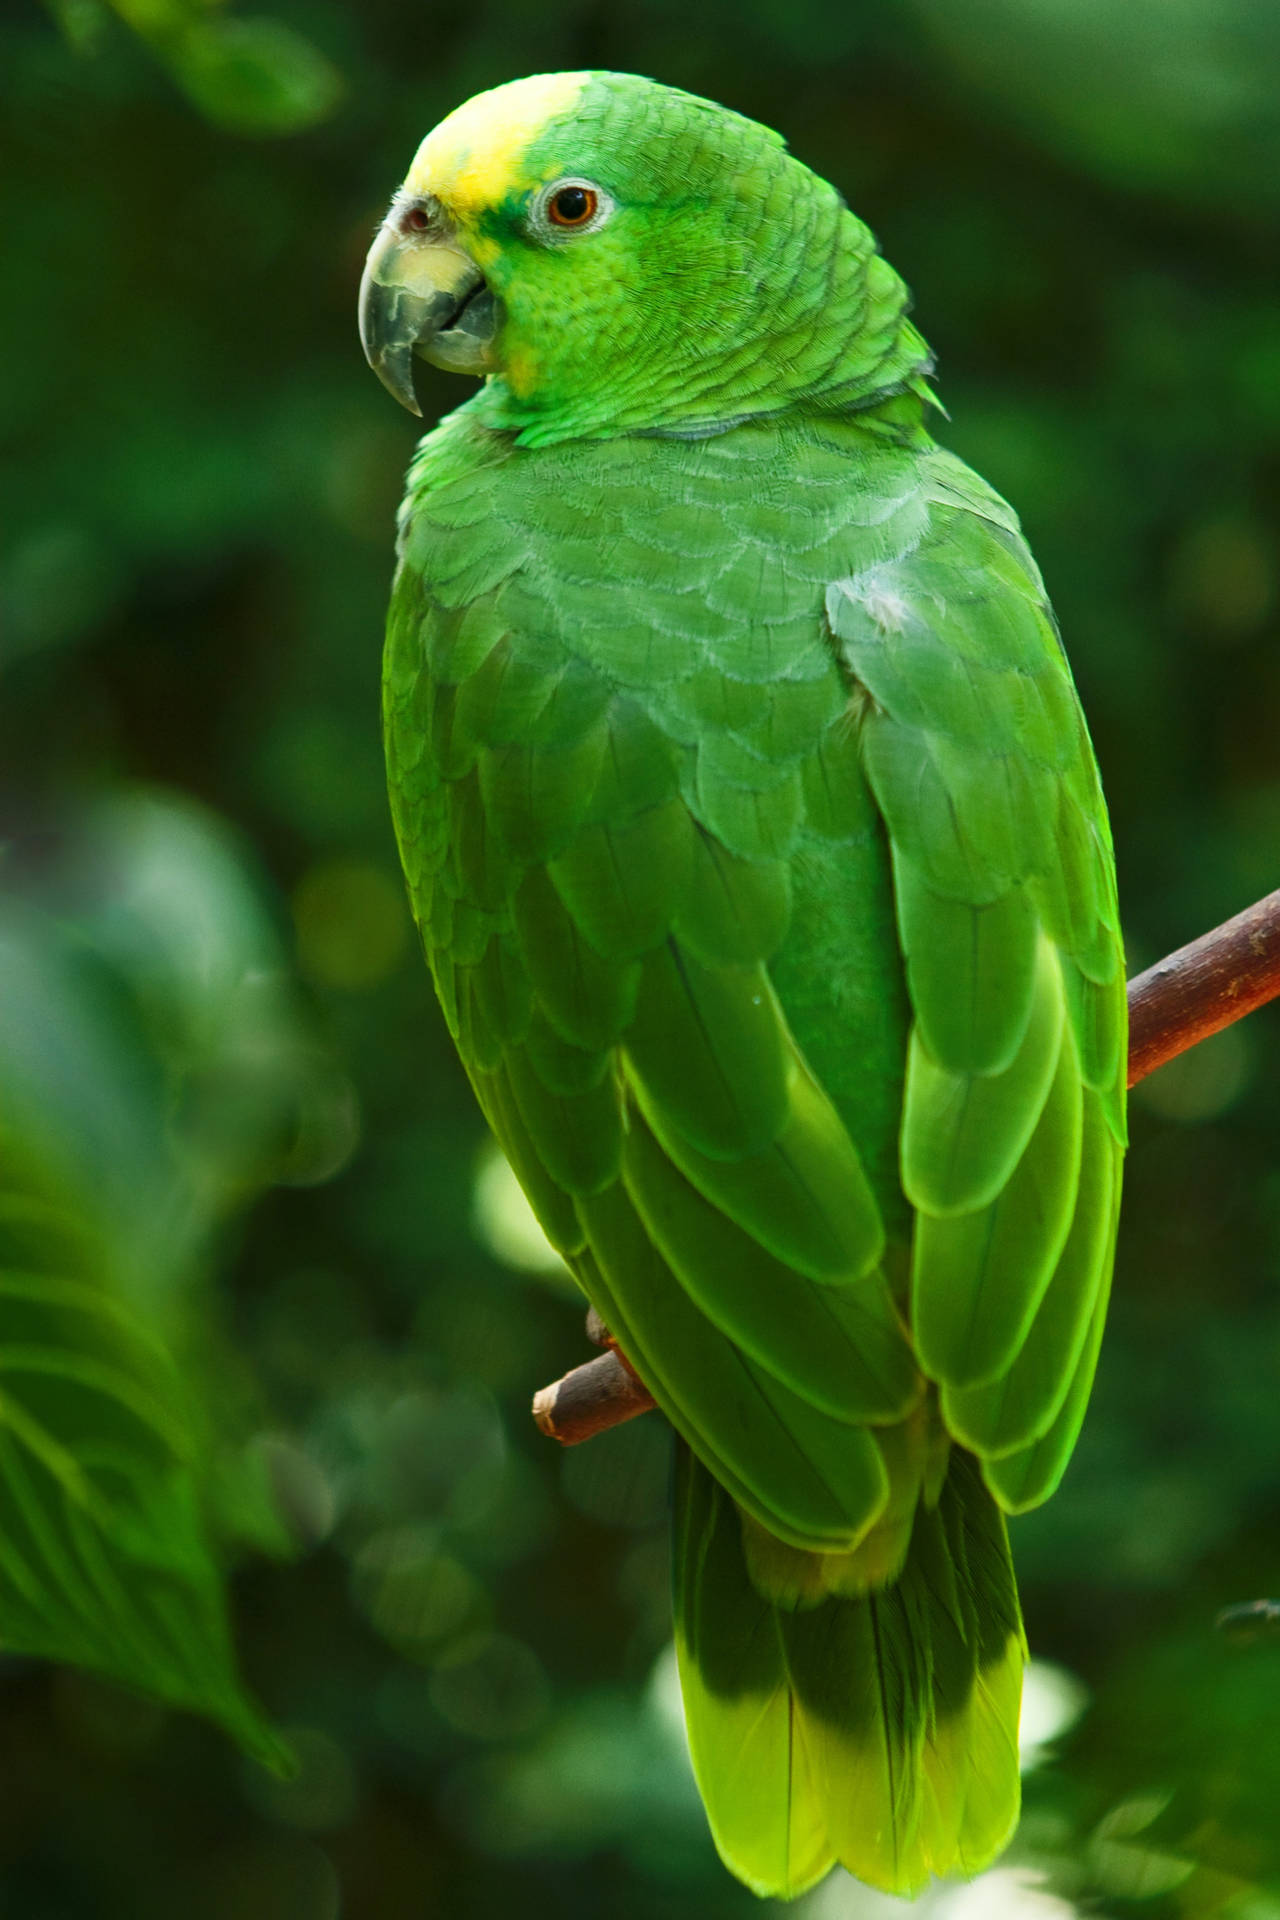 Caption: Vibrant Green Parrot In Hd Quality Background